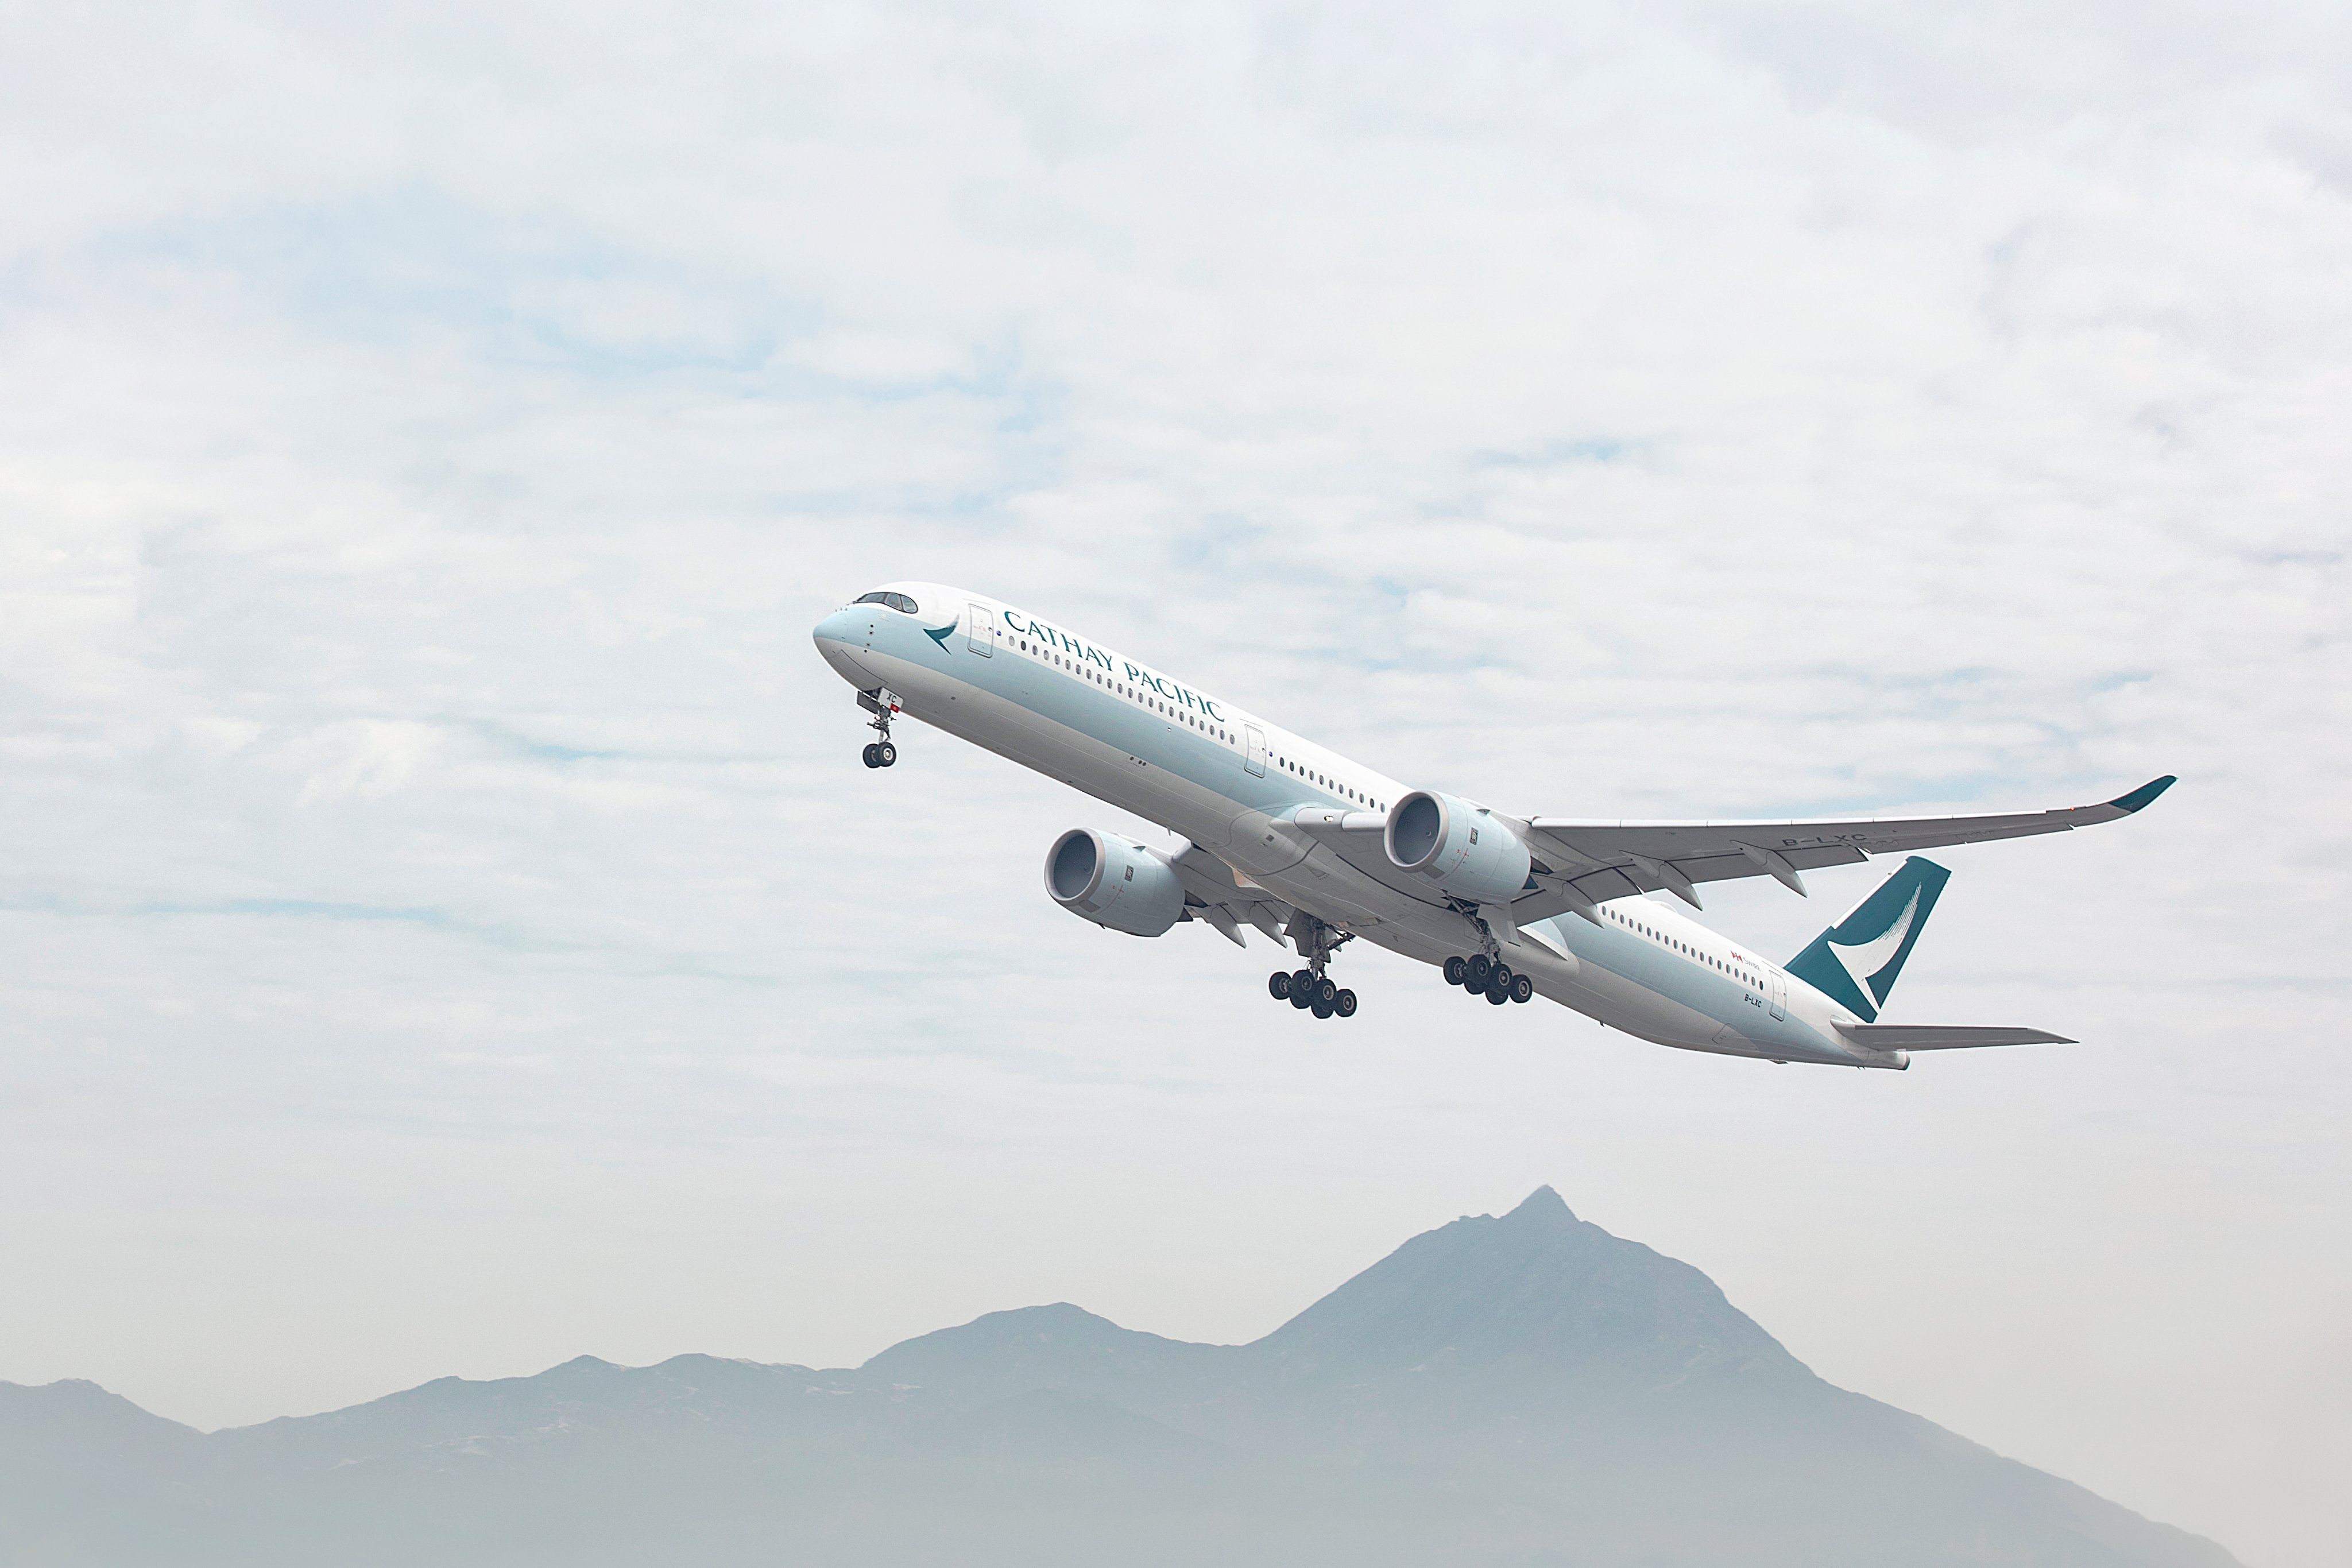 Cathay Pacific Airbus A350 departing.